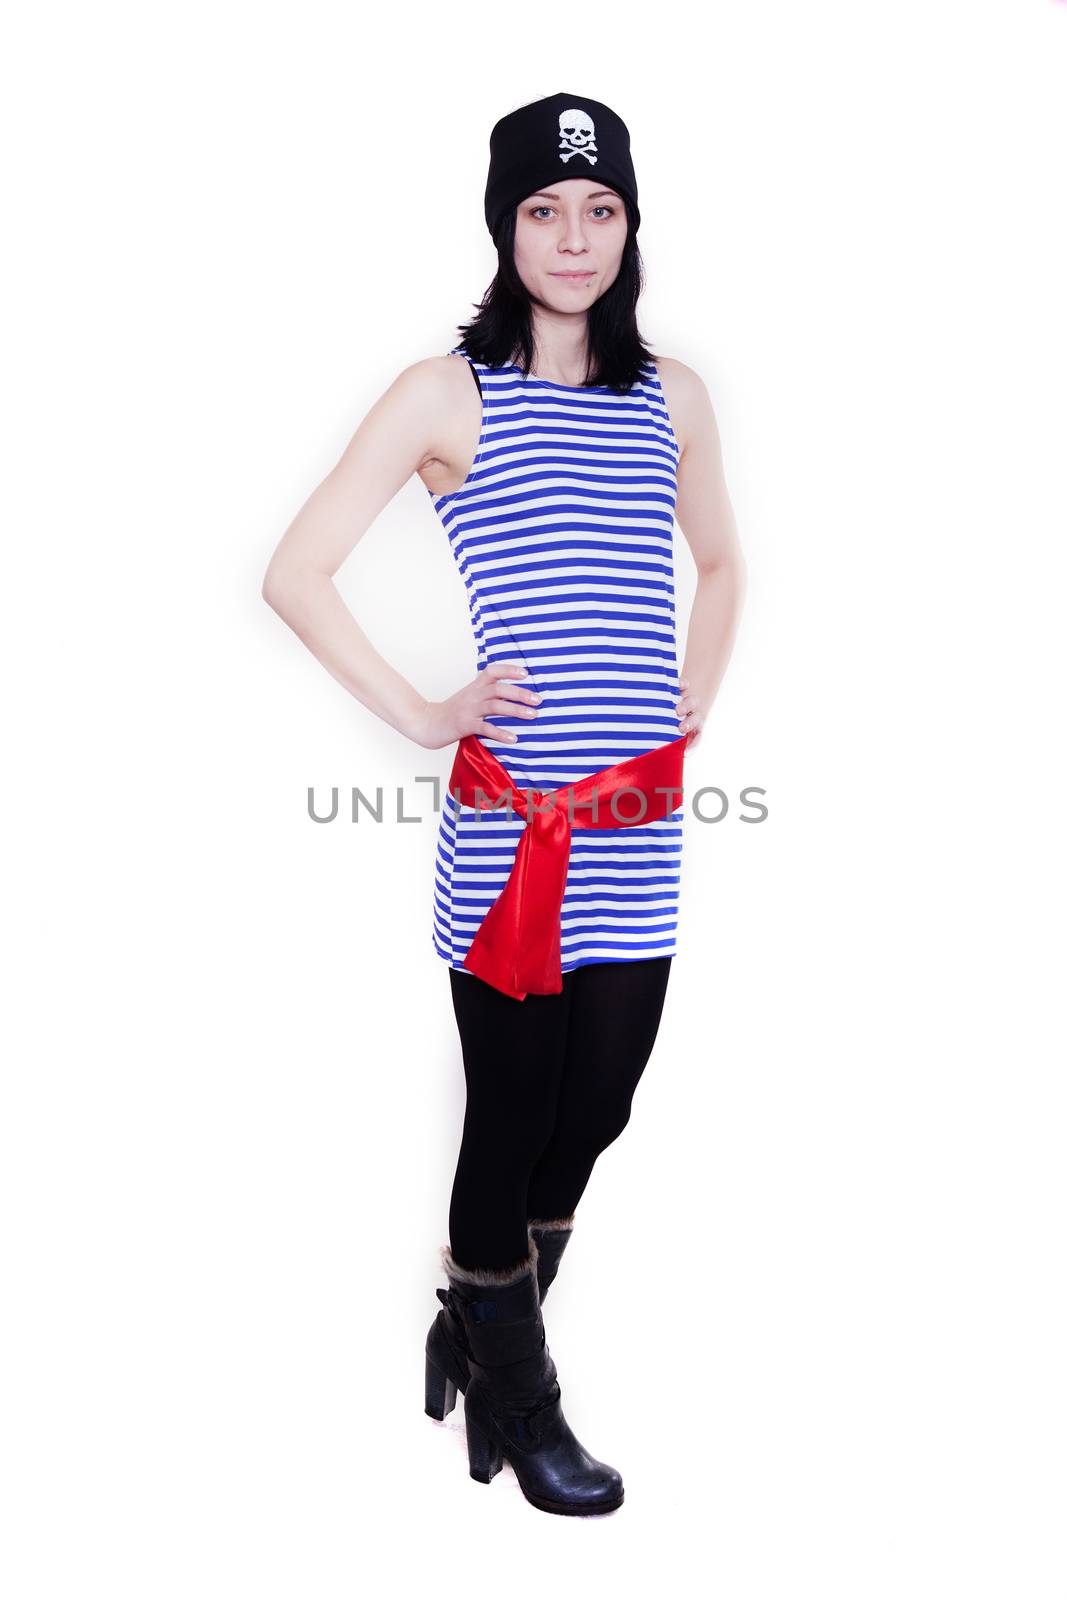 girl in a pirate costume for the holiday, isolated on white background